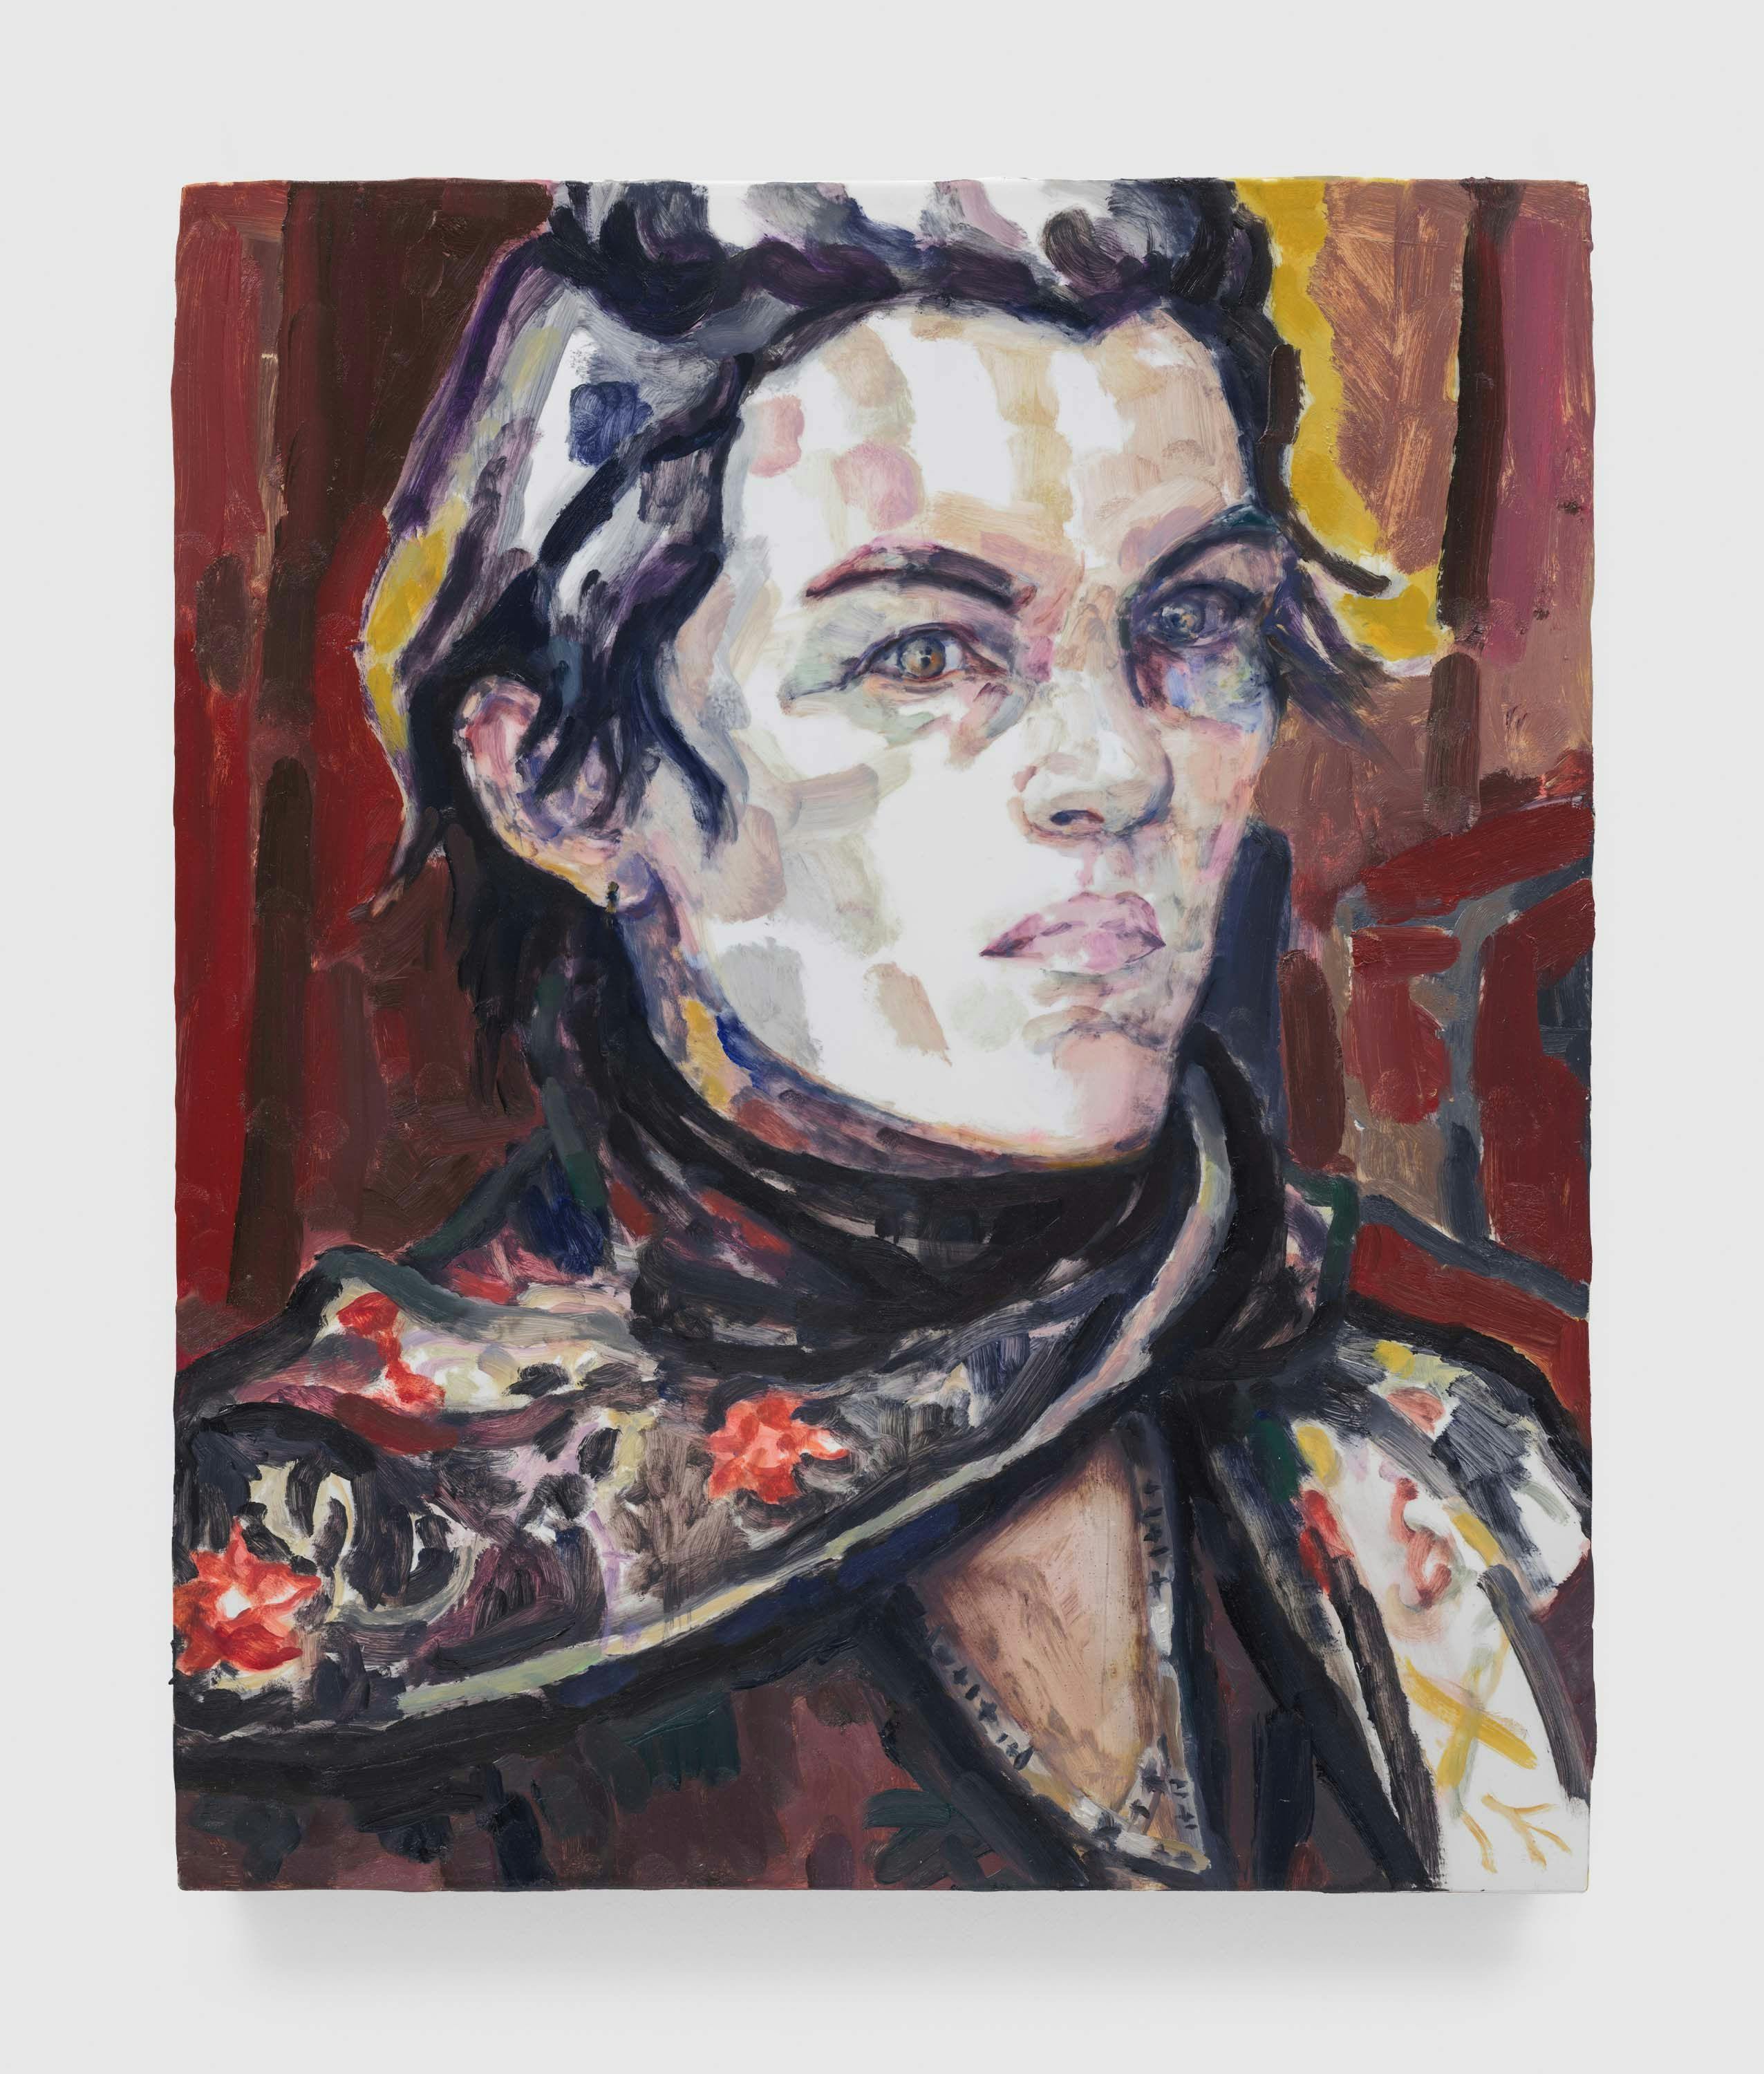 A painting by Elizabeth Peyton, titled Portrait at the Opera (Elizabeth), dated 2016.